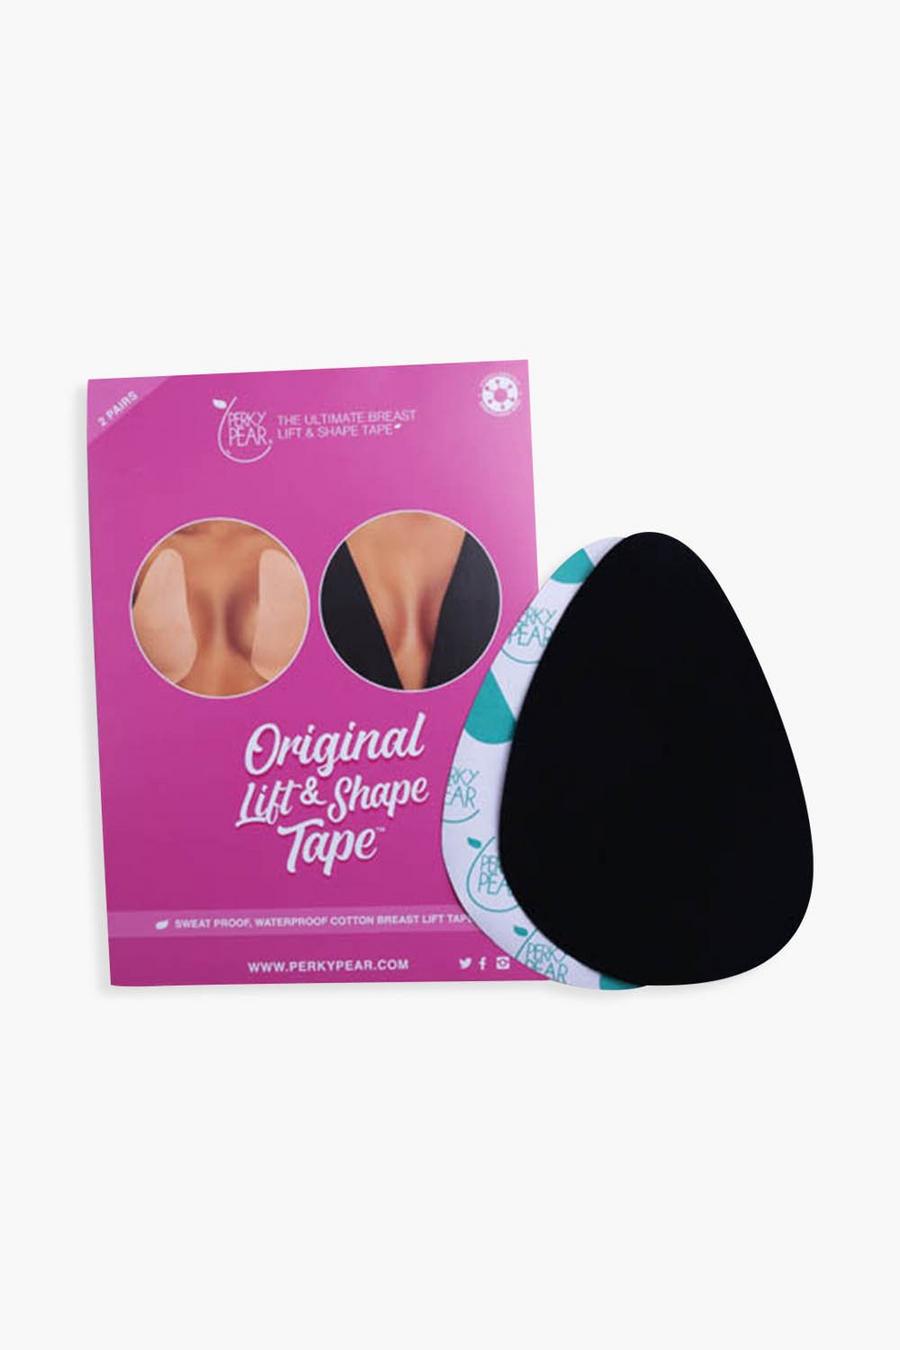 Perky Pear Lift and Shape Breast Tape